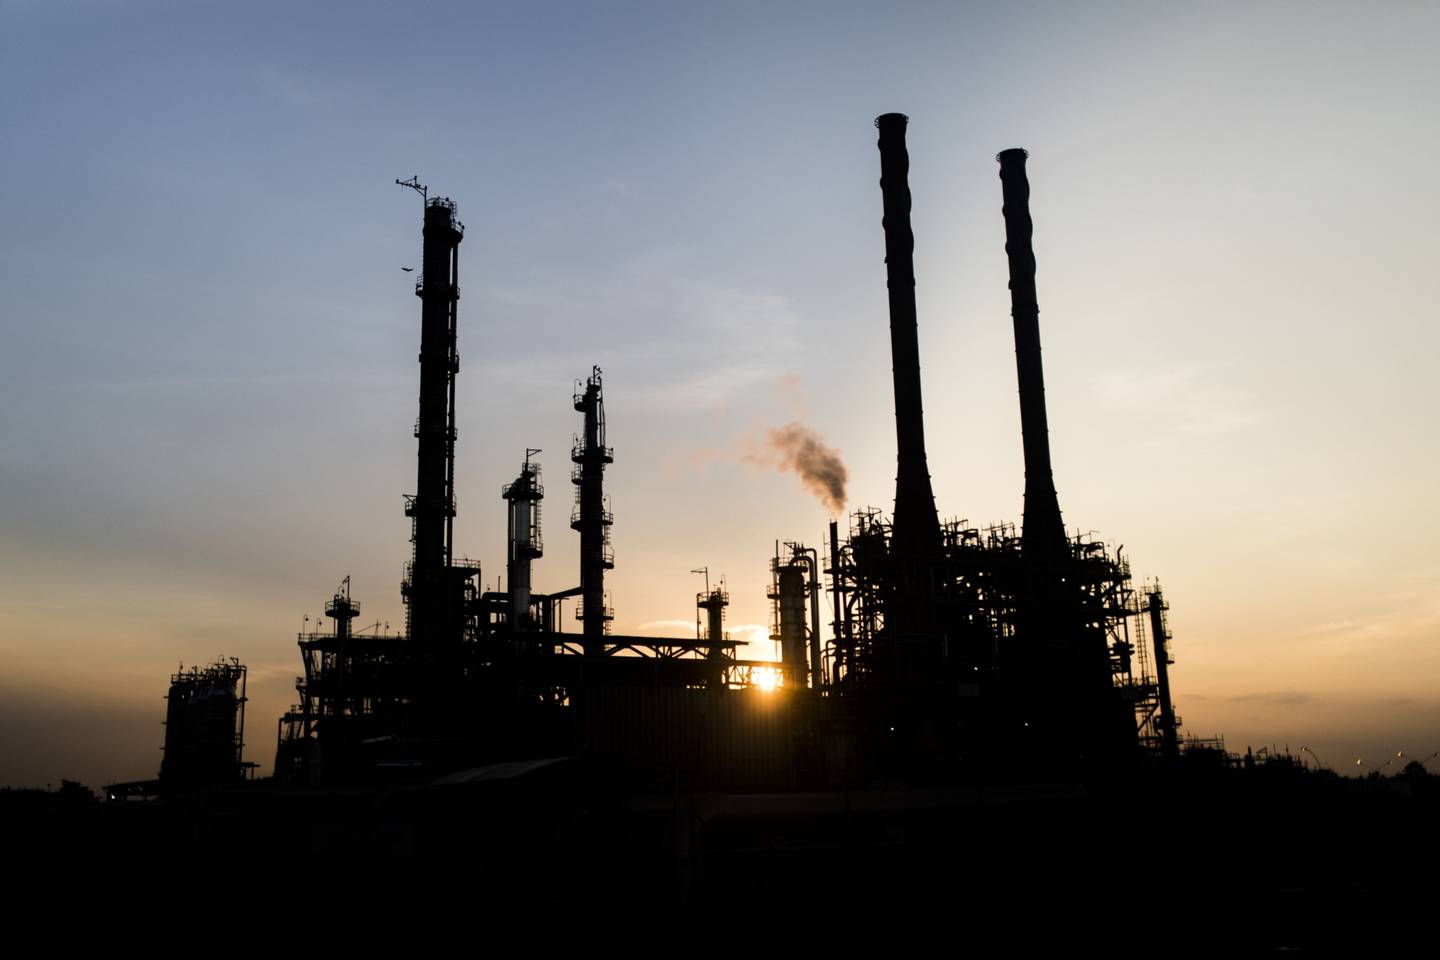 Sunset at the Ecopetrol Barrancabermeja refinery in Barrancabermeja, Colombia, on Tuesday, Feb. 15, 2022. Ecopetrol says it expects organic investments in the range of $17b-$20b for 2022-2024 , of which 69% is expected to be for upstream projects. Photographer: Ivan Valencia/Bloomberg